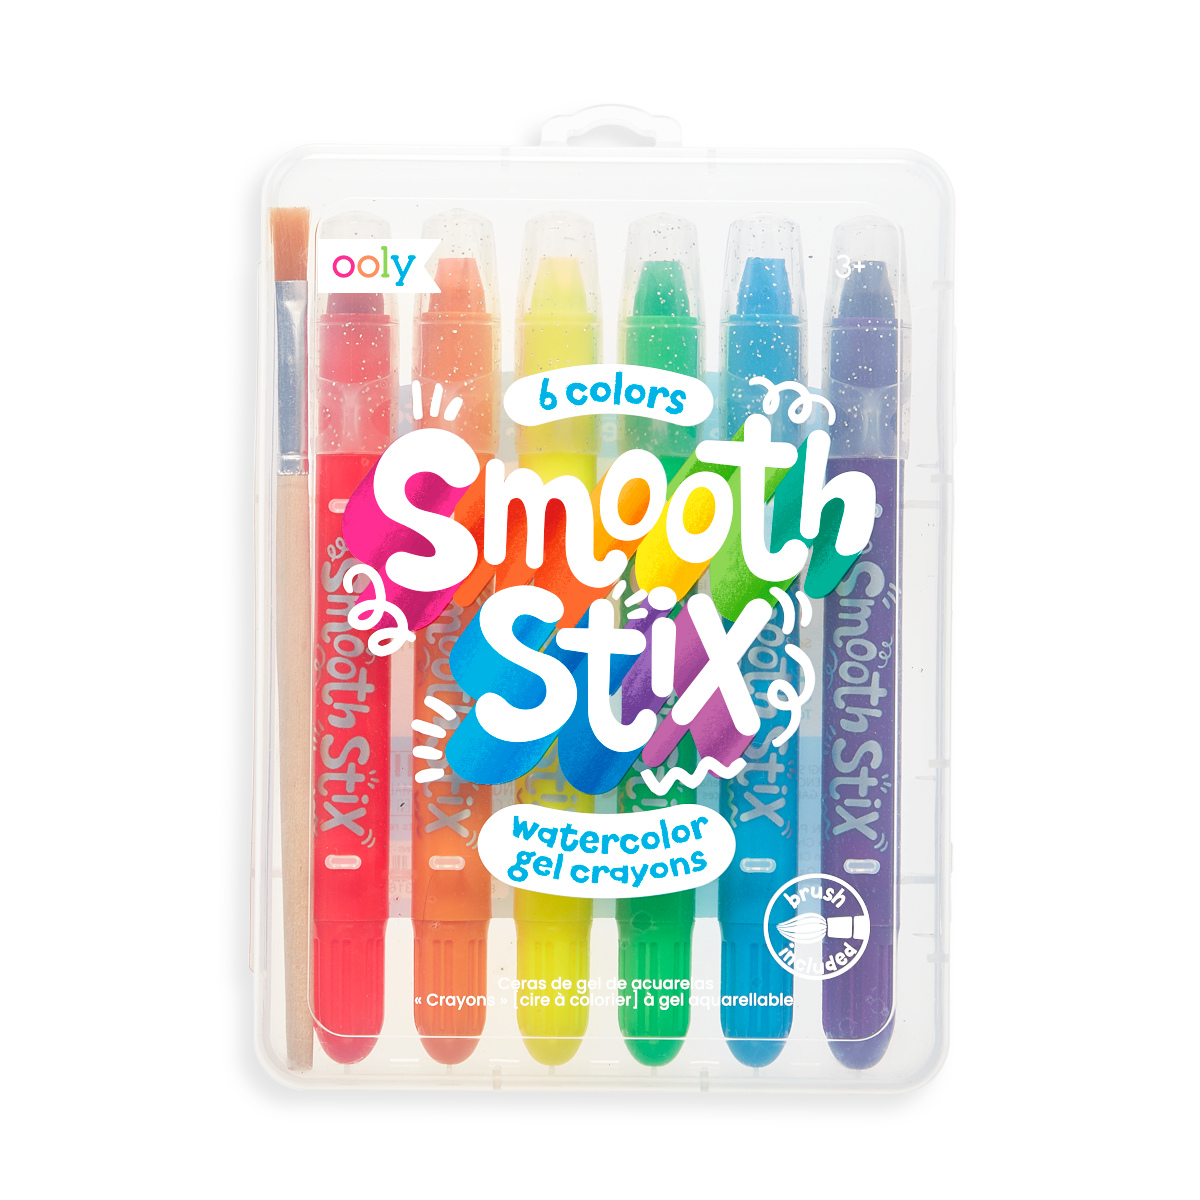 Jolly Super-Waxies Water-Soluble Crayons